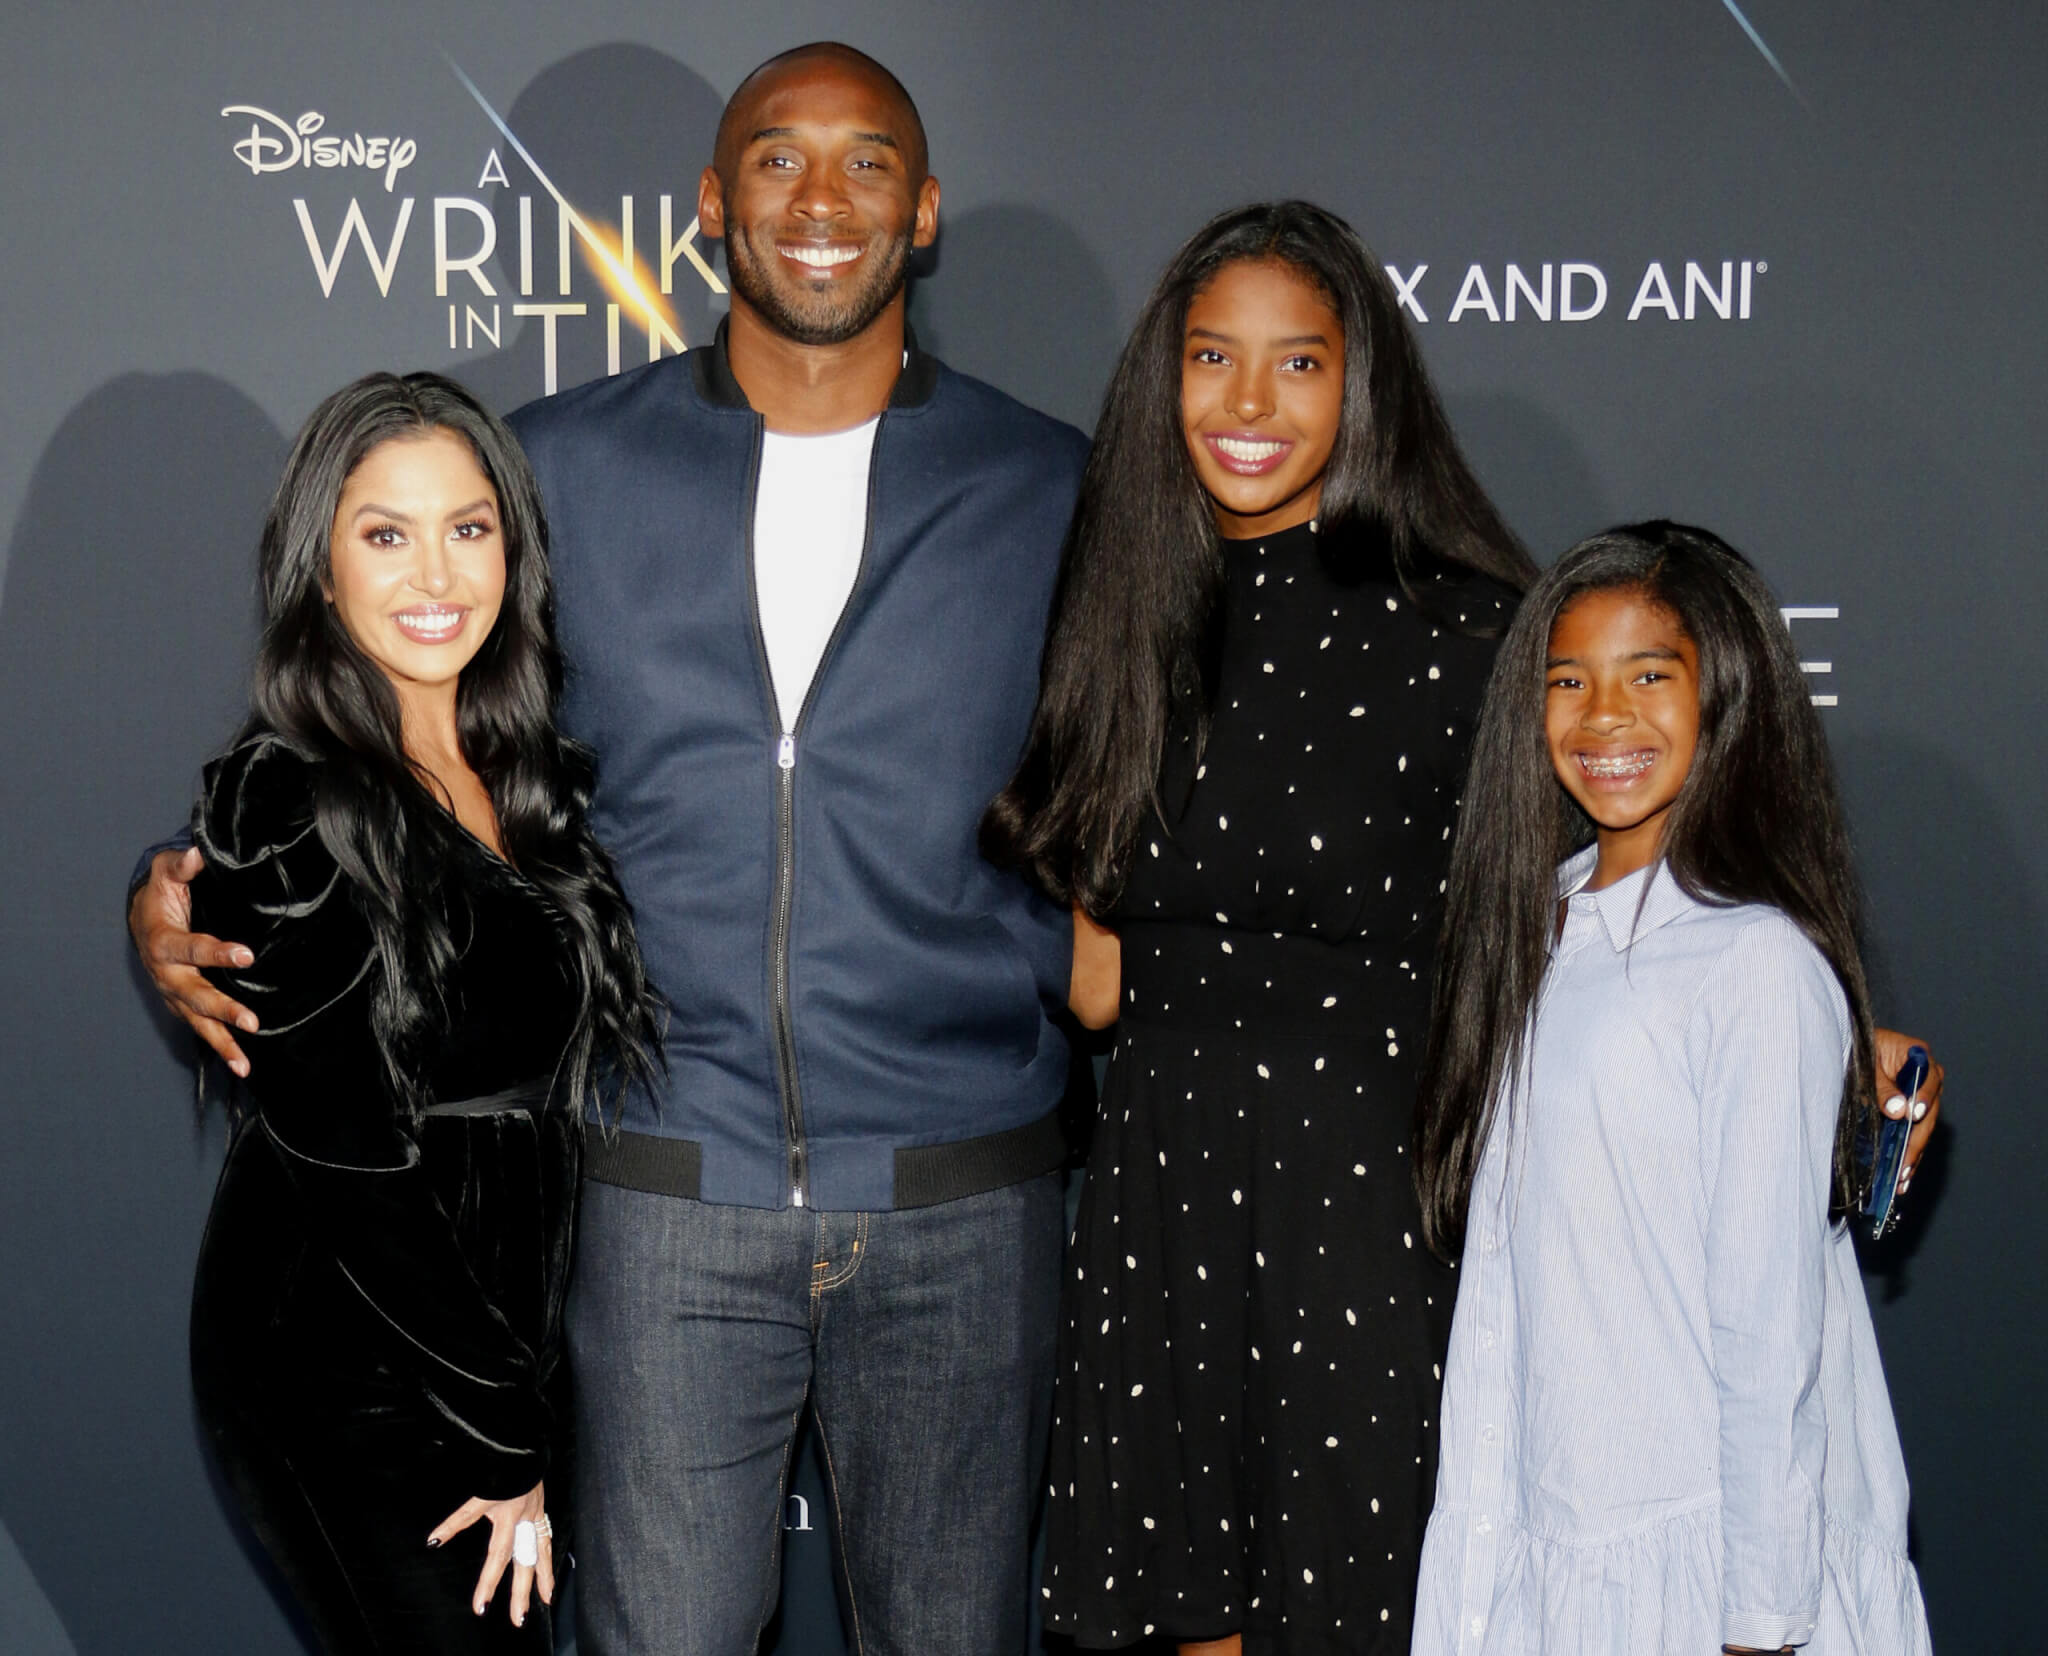 Kobe Bryant and his family at a movie premiere in 2018